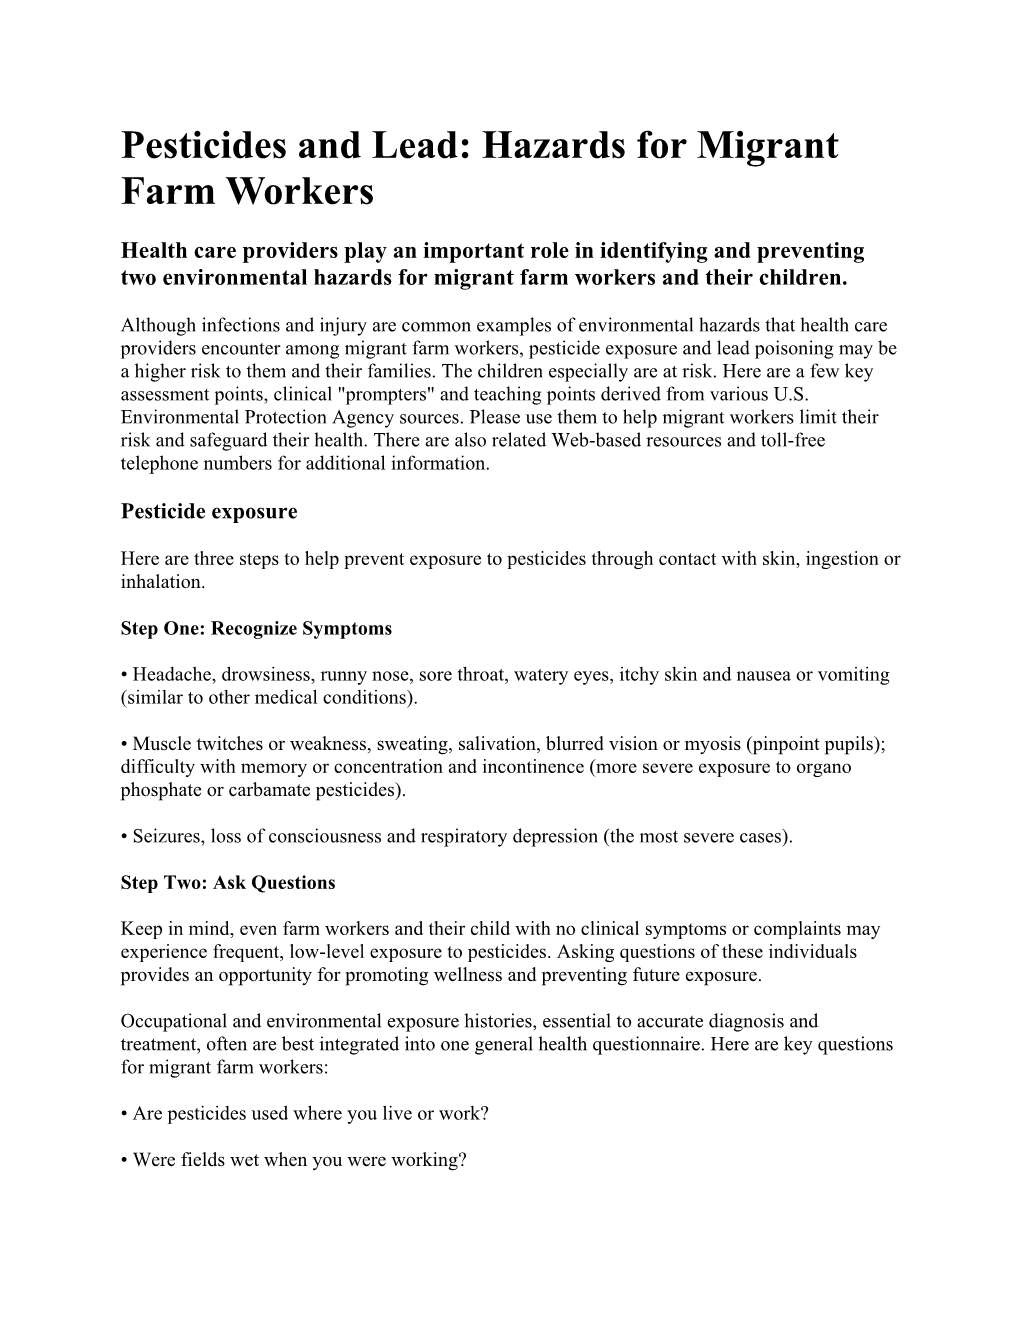 Pesticides and Lead: Hazards for Migrant Farm Workers